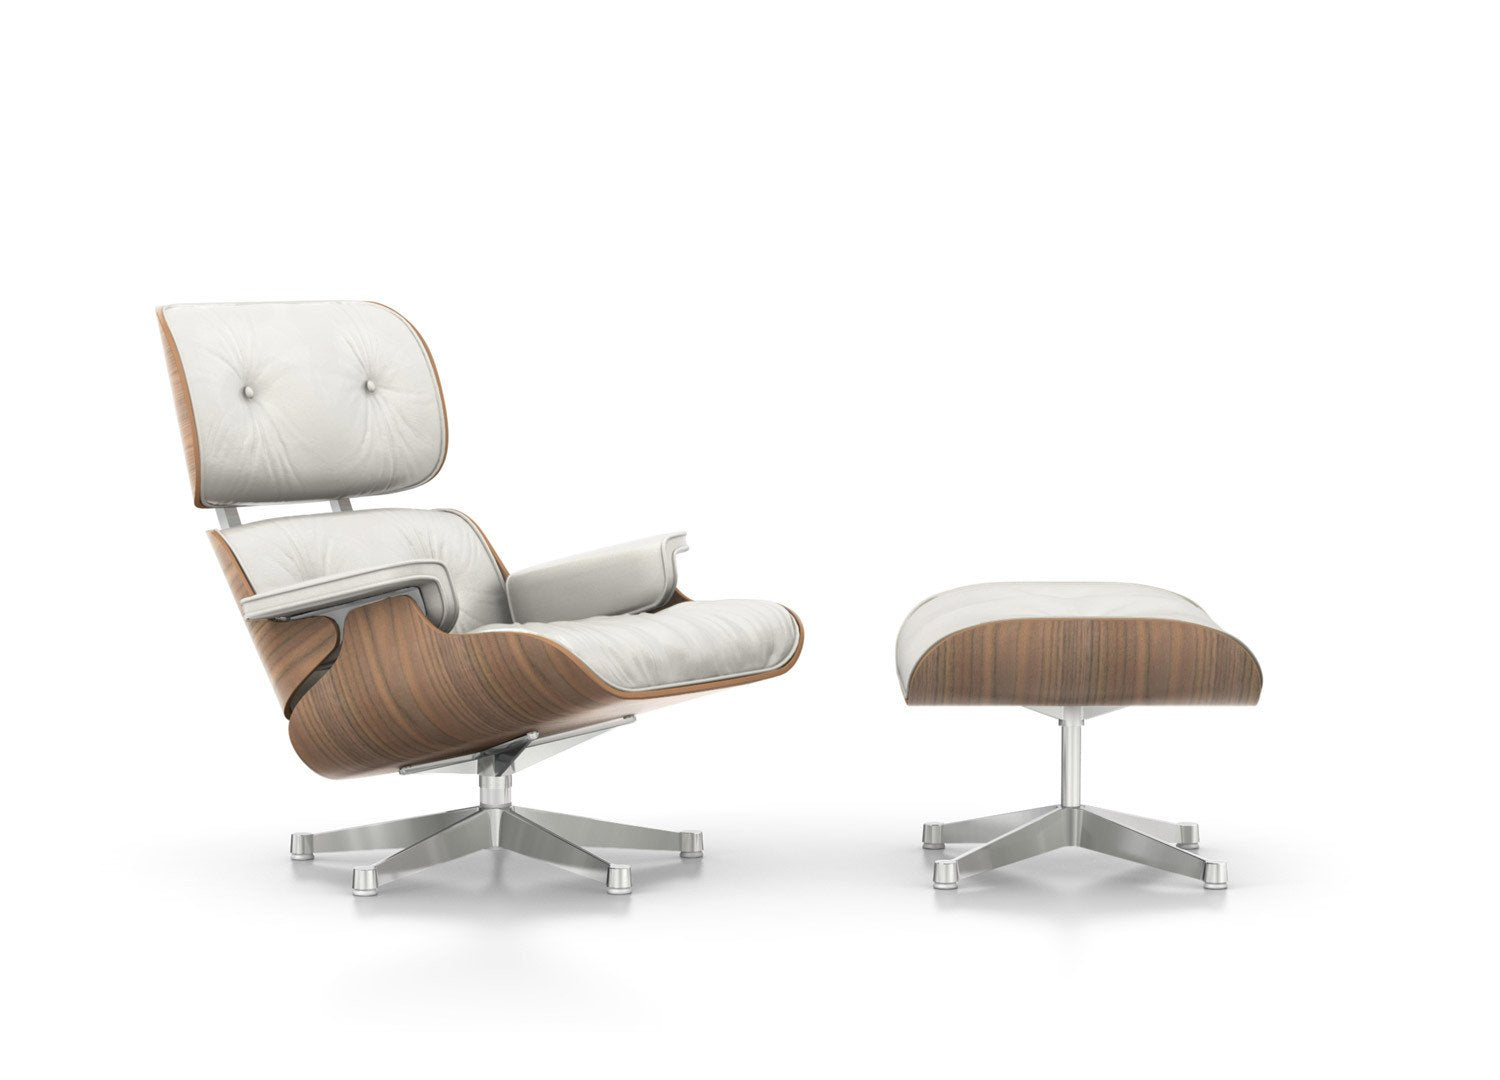 Eames Lounge Chair - White Pigmented Walnut